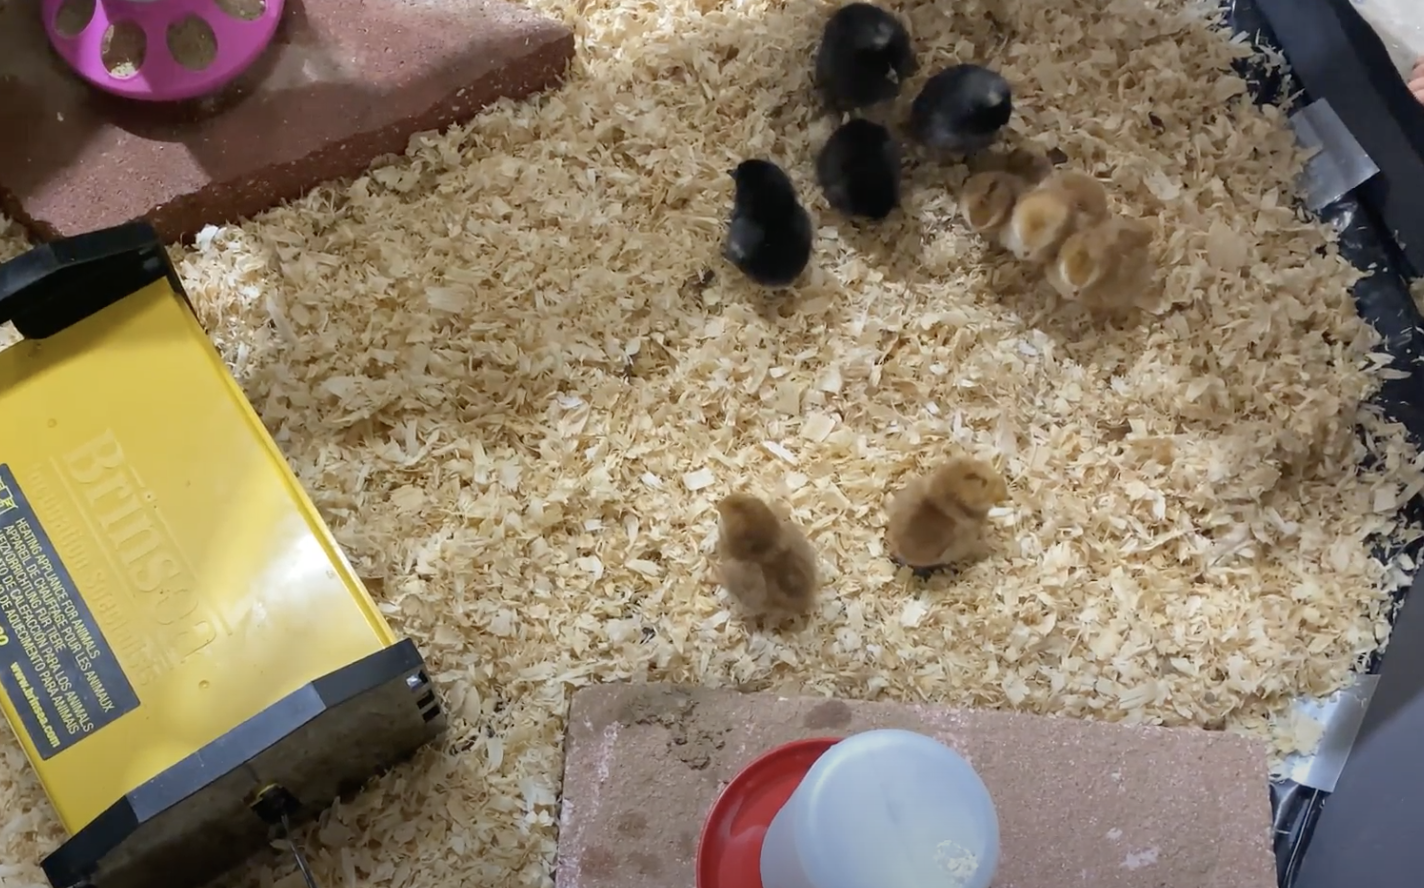 HOW TO SET UP THE BROODER